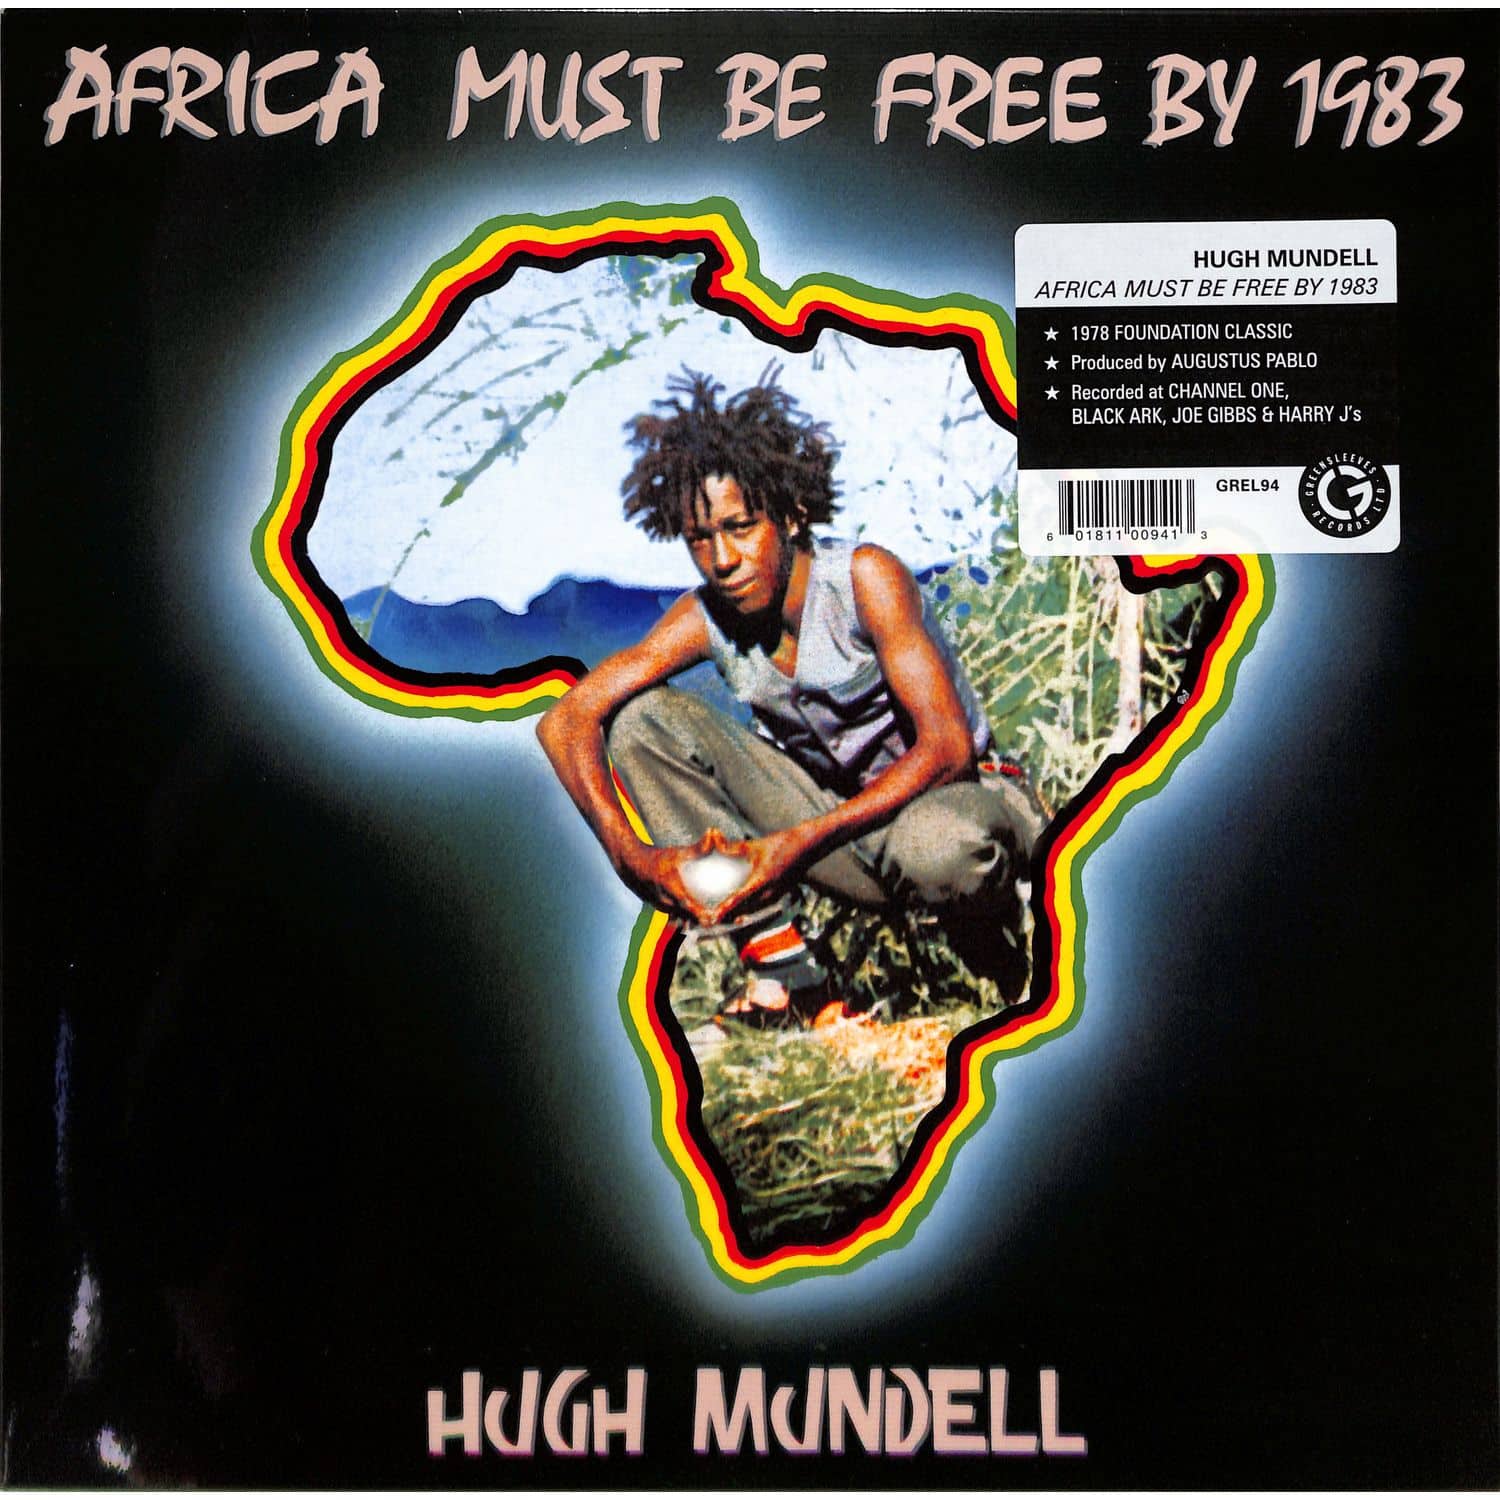 Hugh Mundell - AFRICA MUST BE FREE BY 1983 